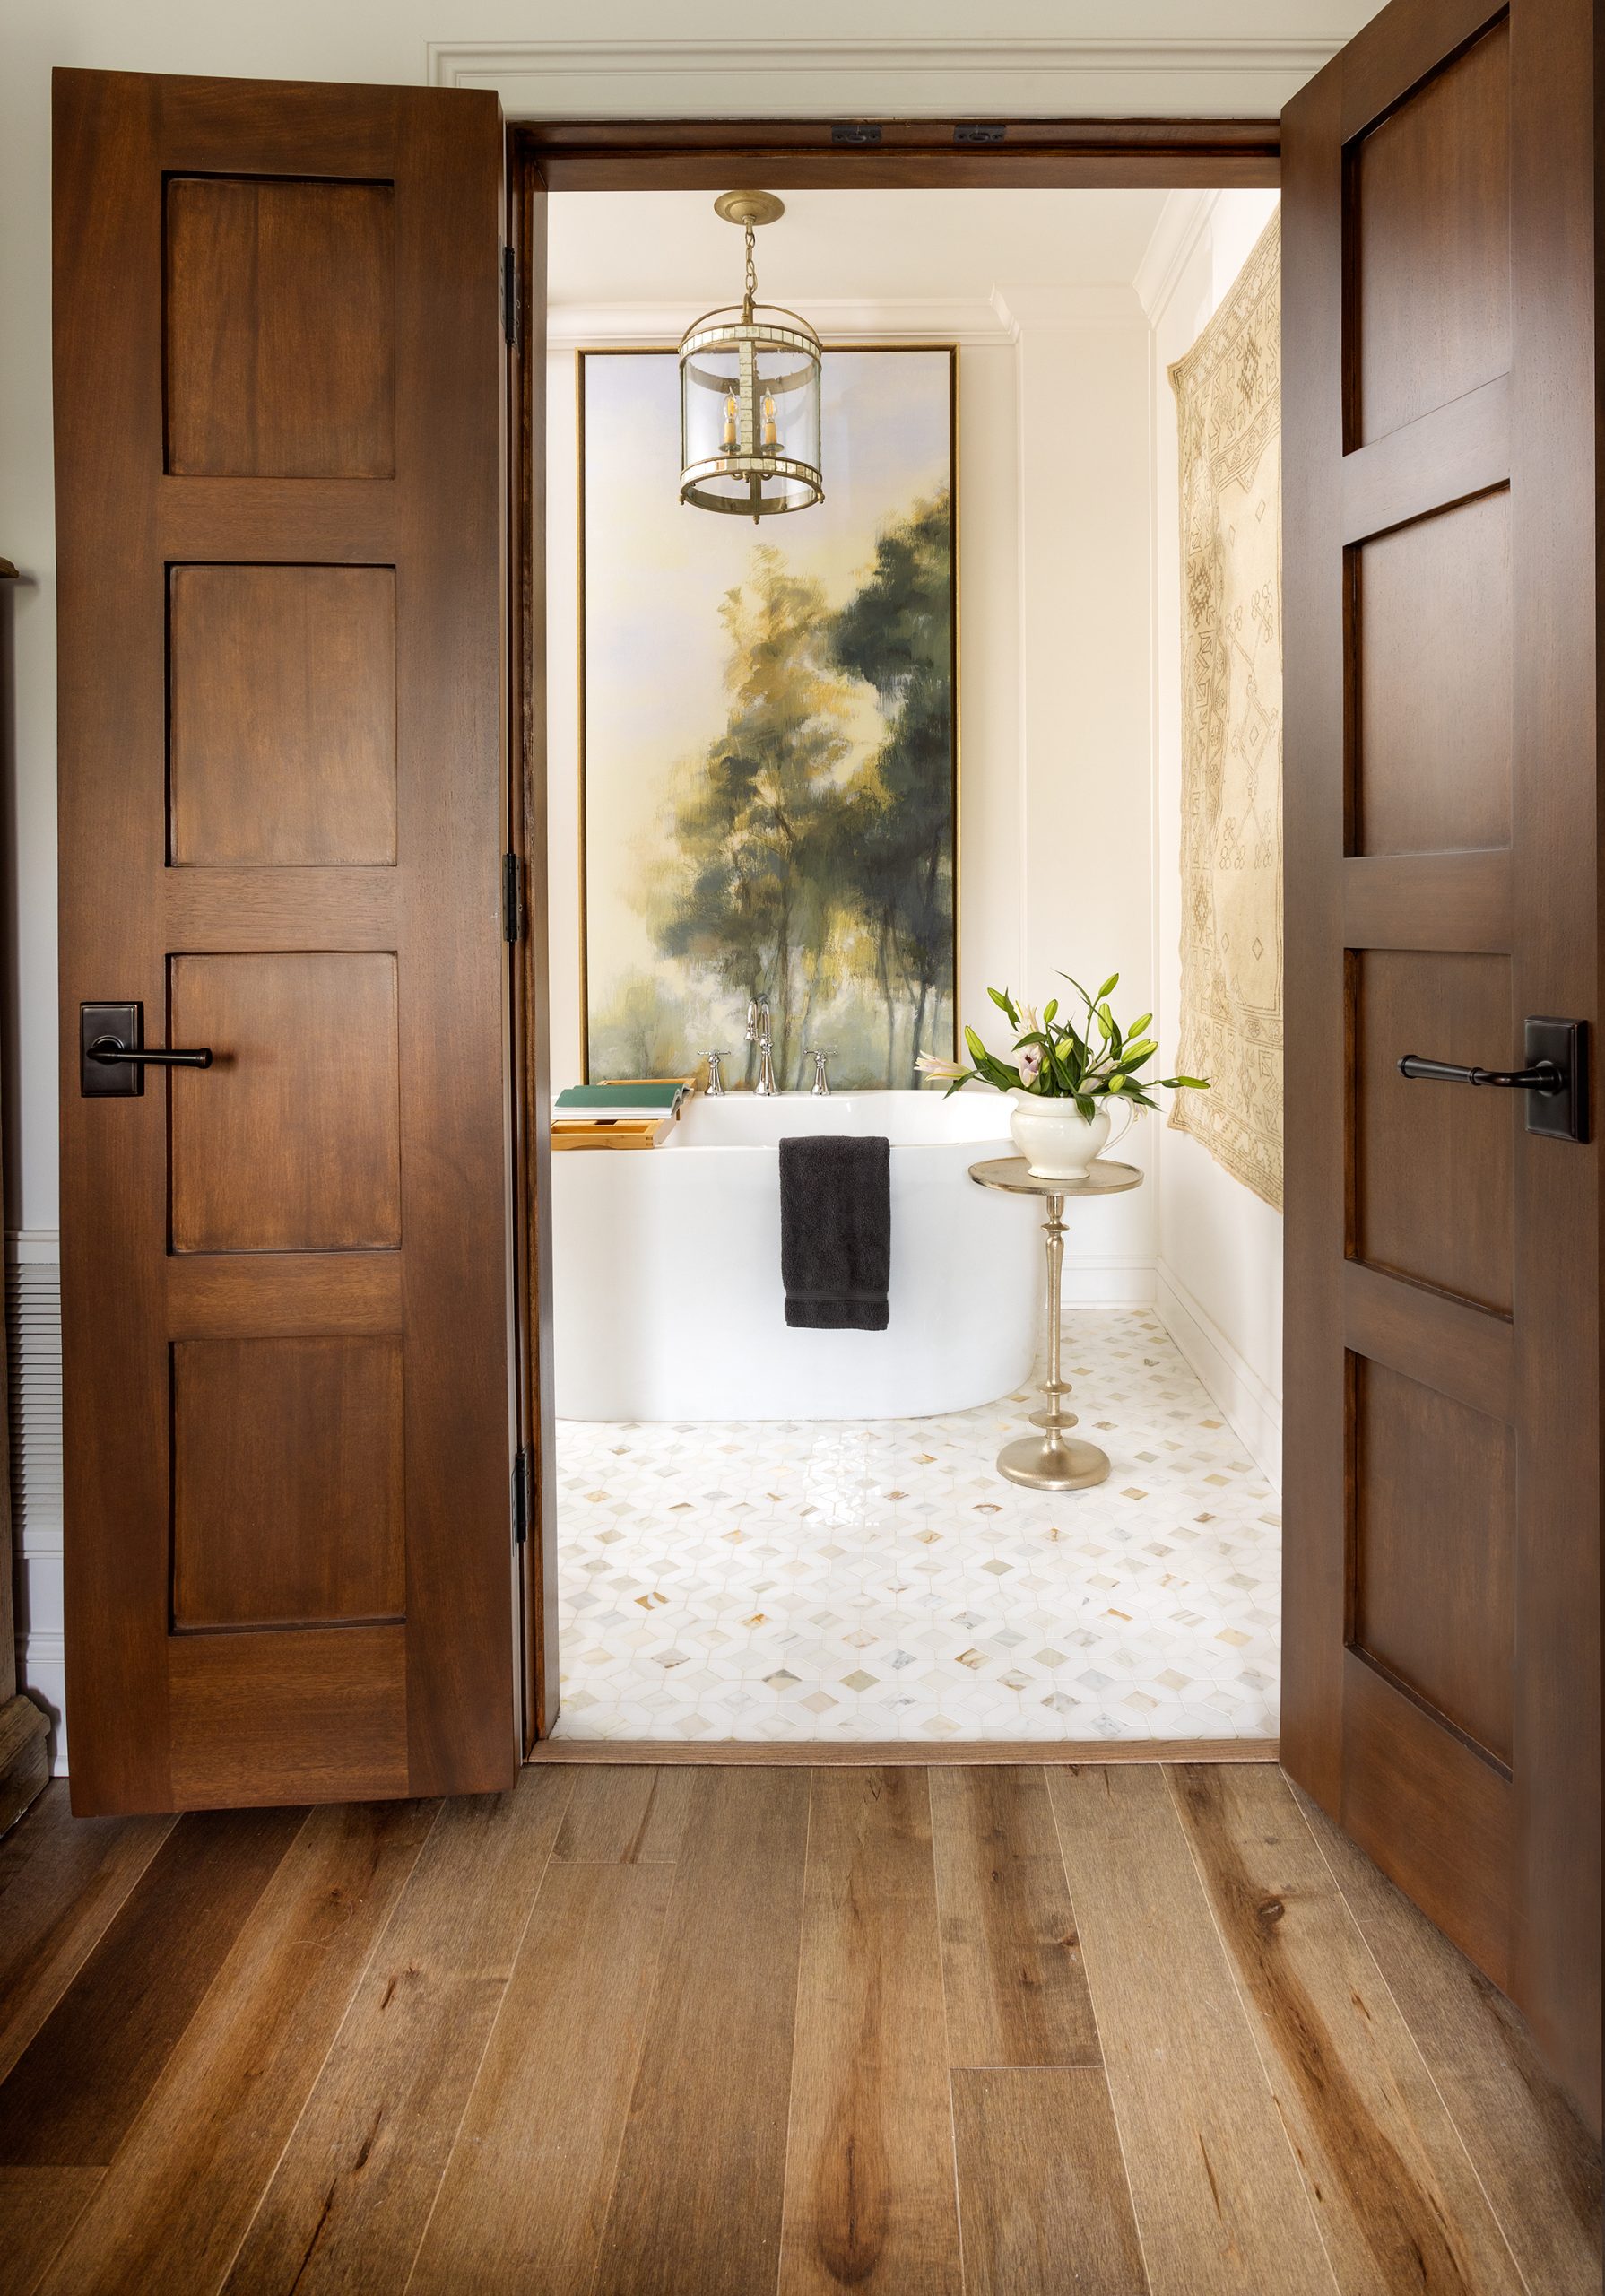 Dark mahogany double doors connect the primary bedroom suite to the bath, opening to a soaking tub that perches beneath a tall abstract painting.
